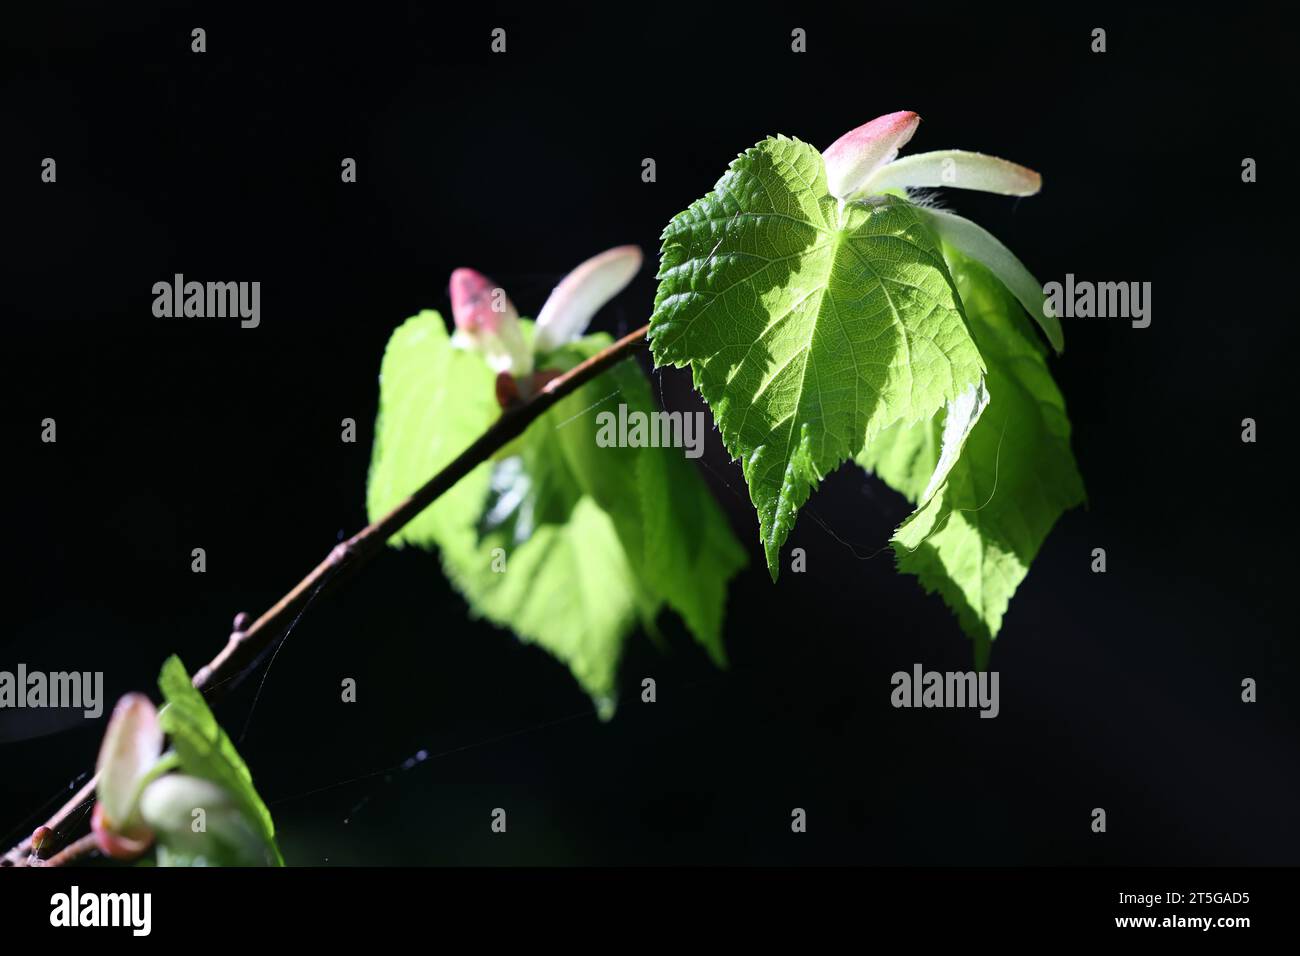 Tilia cordata, known as Small-leaved Lime, Small-leaved Linden or Little-leaf Linden, fresh leaves in spring Stock Photo